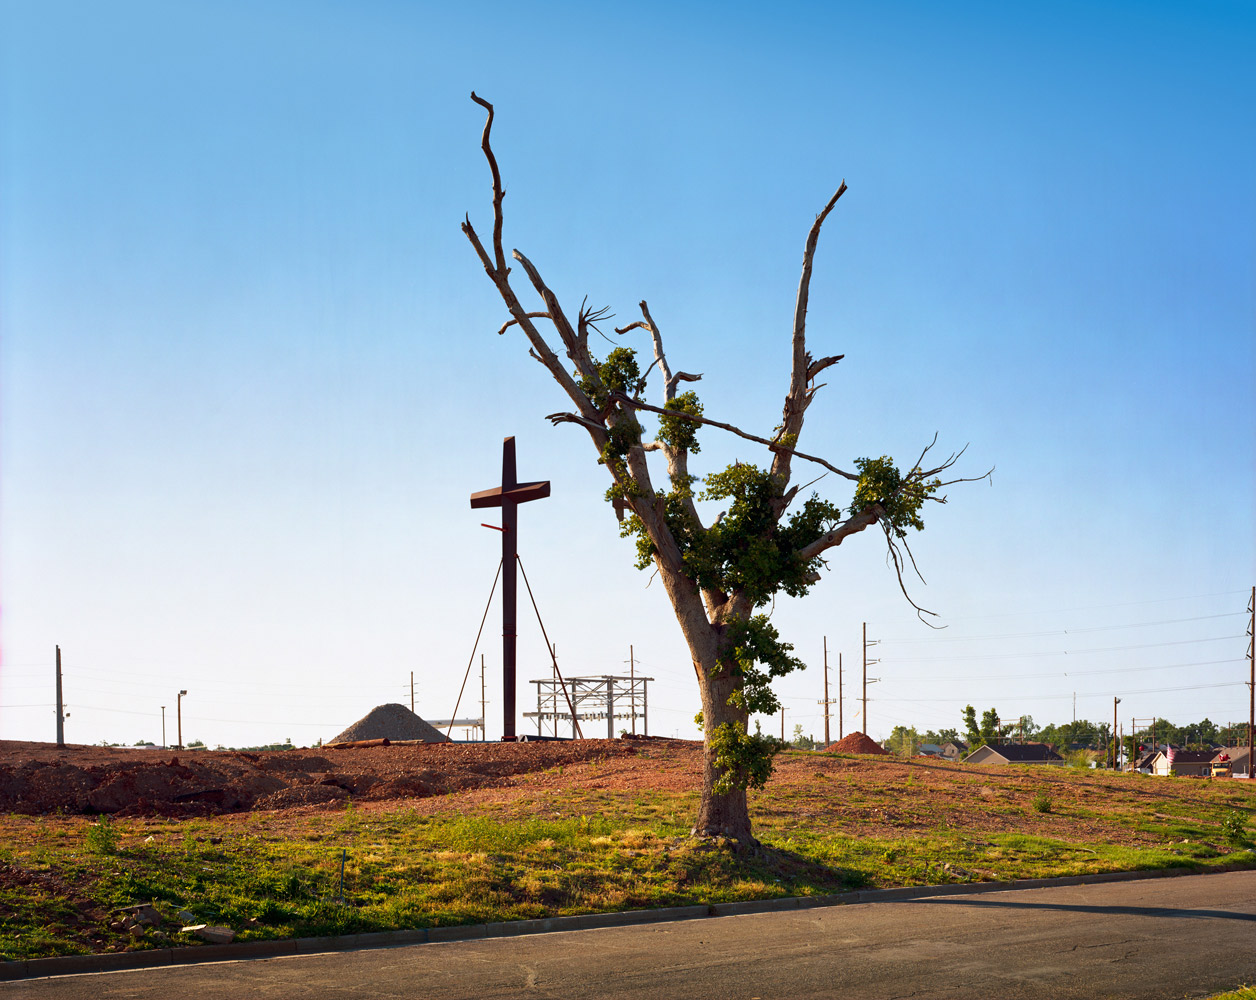 An oak tree comes back near the site of St. Mary's church, which was completely destroyed except for its cross. The tree is along S. Moffet Street.